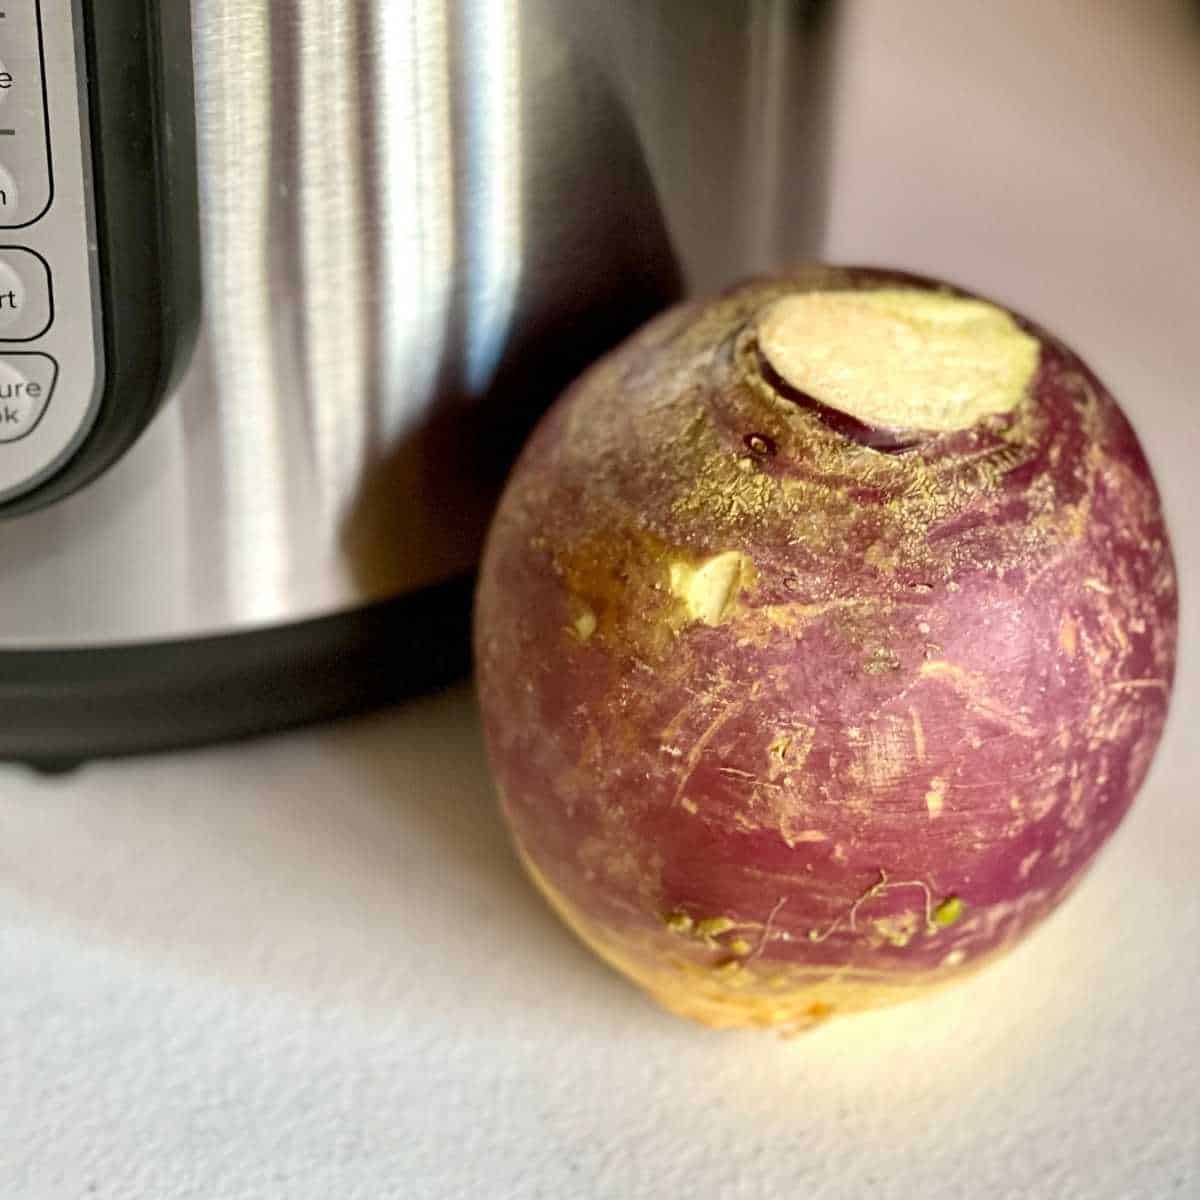 https://www.feistytapas.com/wp-content/uploads/2022/01/How-to-Pressure-Cook-a-Whole-Swede-or-Rutabaga.jpg